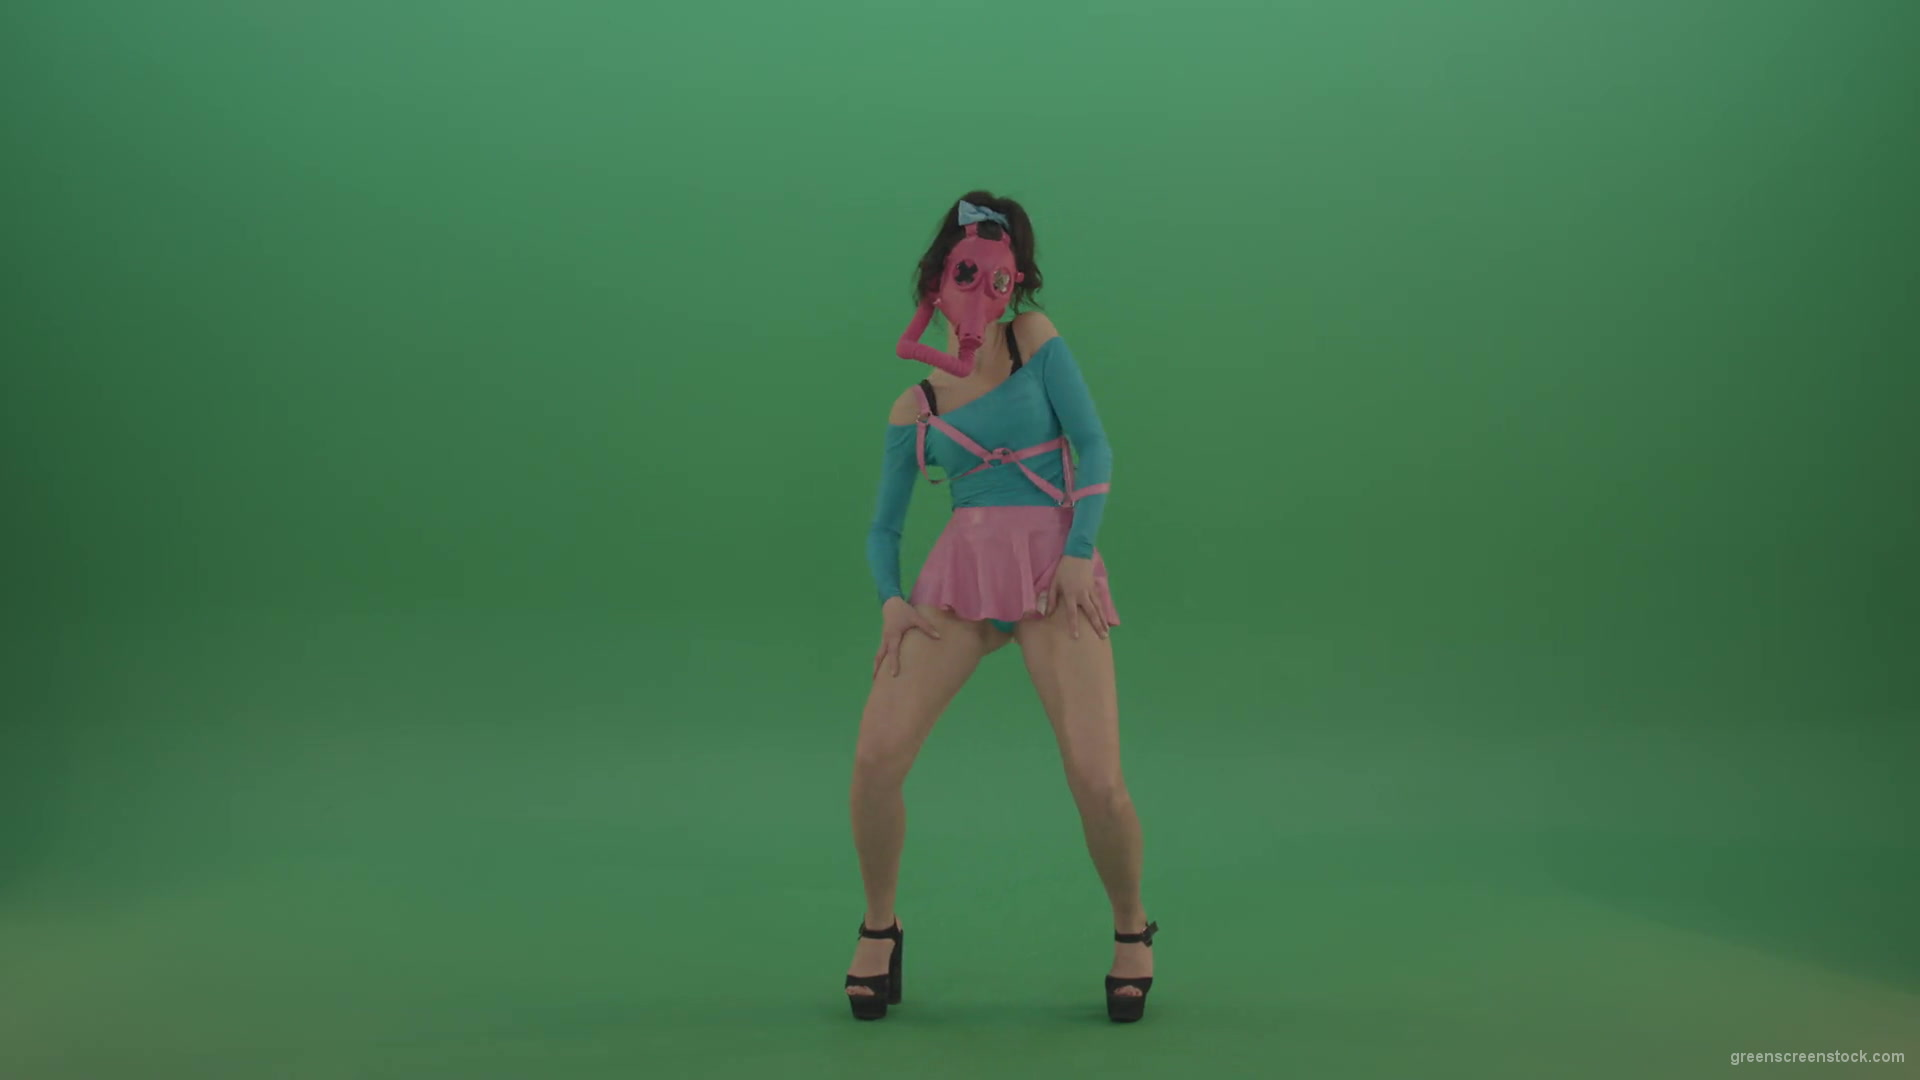 Fetish-Go-Go-Girl-dancing-in-pink-gas-mask-over-green-screen-4K-Video-Footage-1920_008 Green Screen Stock